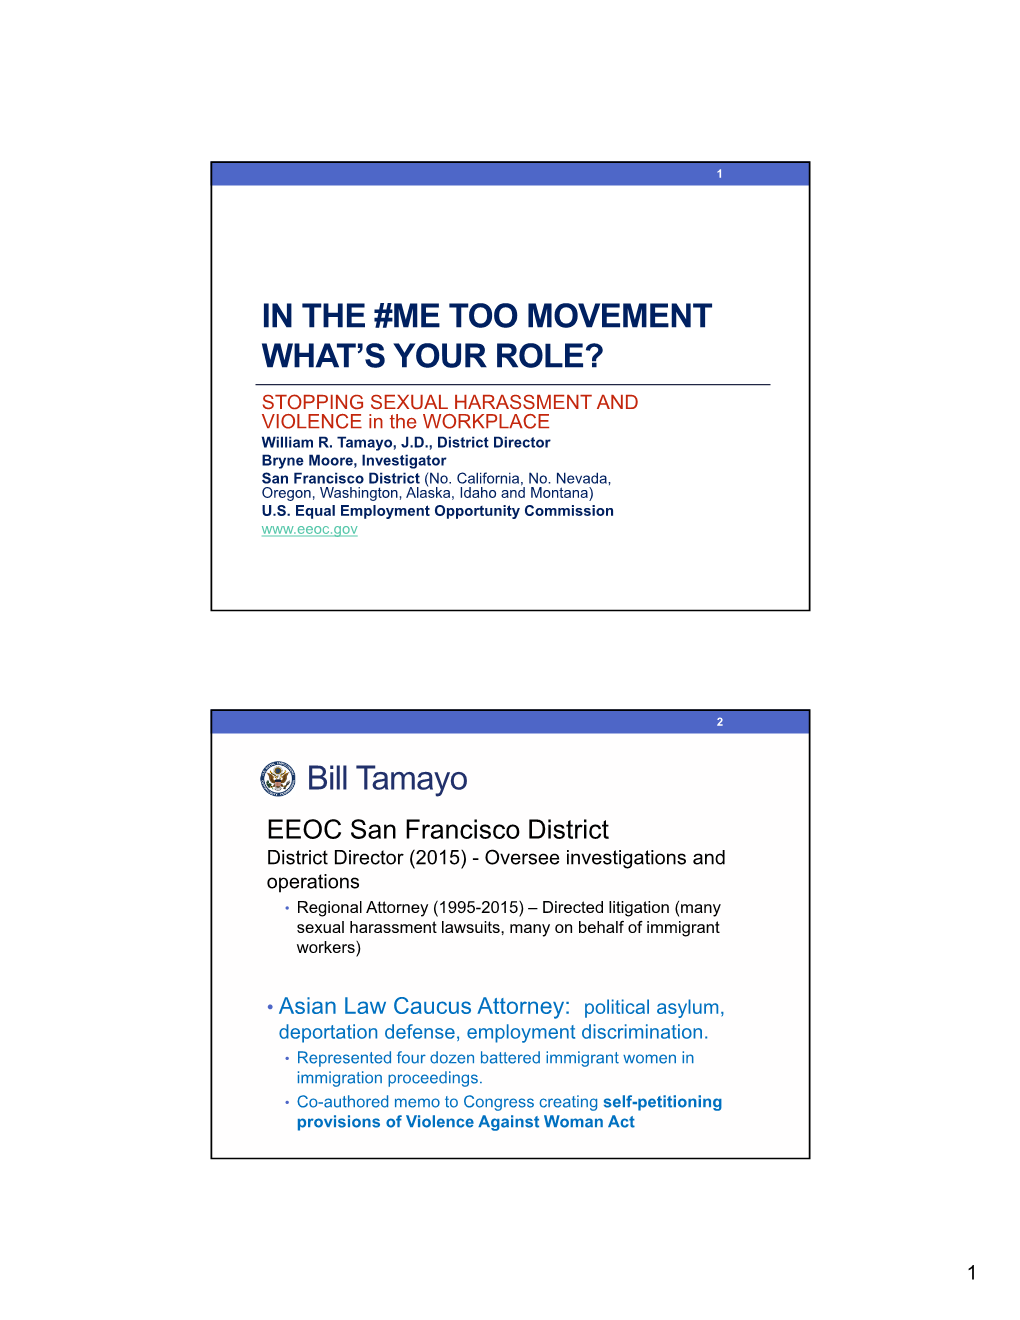 IN the #ME TOO MOVEMENT WHAT's YOUR ROLE? Bill Tamayo